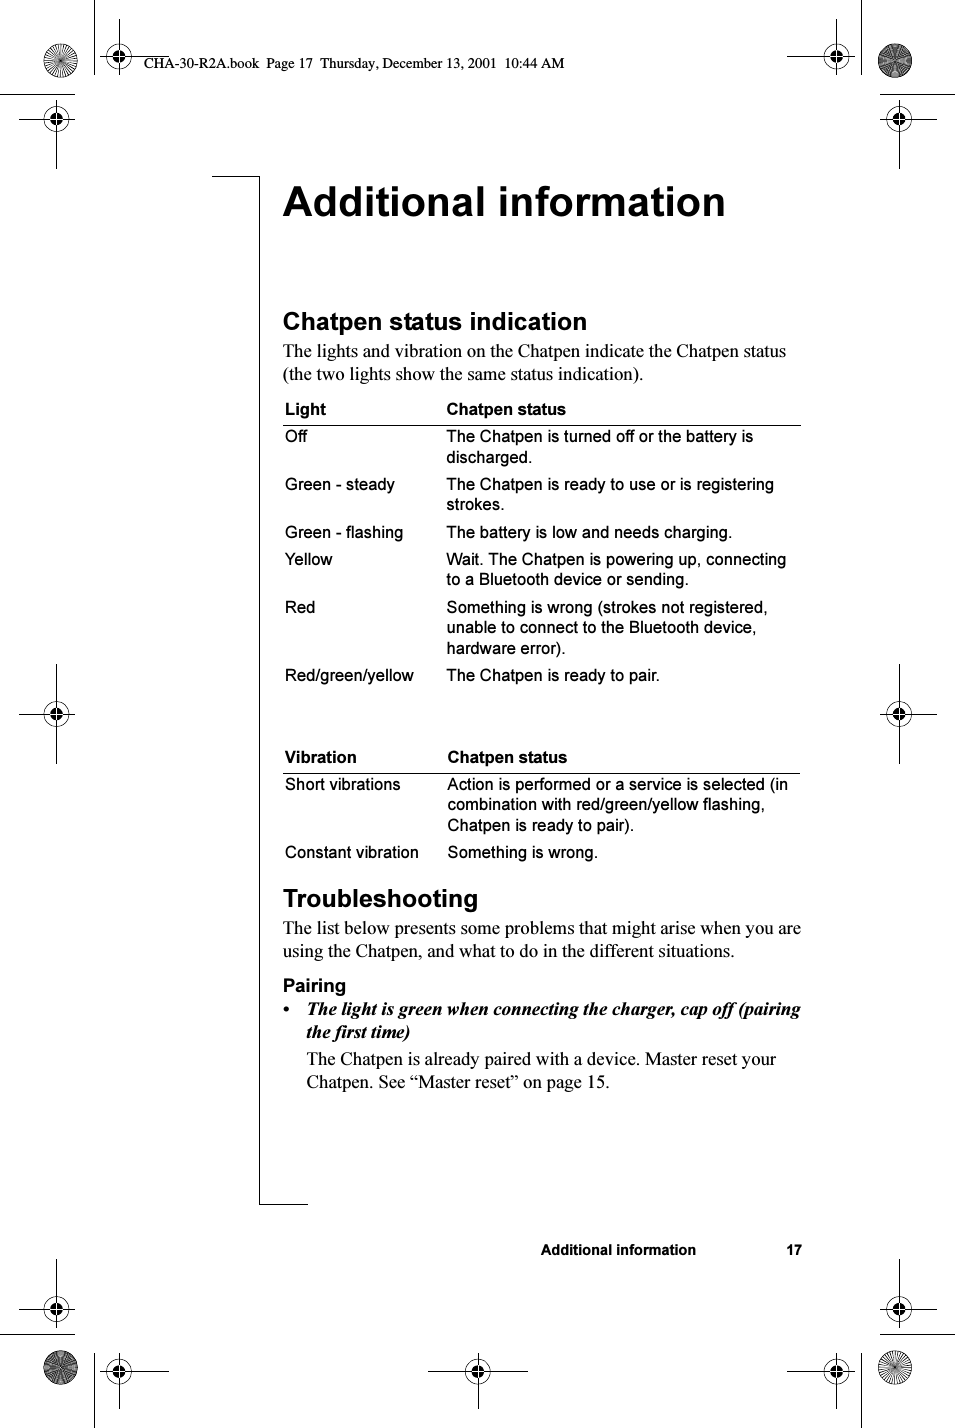 Additional information 17Additional informationChatpen status indicationThe lights and vibration on the Chatpen indicate the Chatpen status (the two lights show the same status indication).TroubleshootingThe list below presents some problems that might arise when you are using the Chatpen, and what to do in the different situations.Pairing• The light is green when connecting the charger, cap off (pairing the first time)The Chatpen is already paired with a device. Master reset your Chatpen. See “Master reset” on page 15.Light Chatpen statusOff The Chatpen is turned off or the battery is discharged.Green - steady  The Chatpen is ready to use or is registering strokes.Green - flashing The battery is low and needs charging.Yellow Wait. The Chatpen is powering up, connecting to a Bluetooth device or sending.Red Something is wrong (strokes not registered, unable to connect to the Bluetooth device, hardware error).Red/green/yellow The Chatpen is ready to pair.Vibration Chatpen statusShort vibrations Action is performed or a service is selected (in combination with red/green/yellow flashing, Chatpen is ready to pair).Constant vibration Something is wrong.CHA-30-R2A.book  Page 17  Thursday, December 13, 2001  10:44 AM